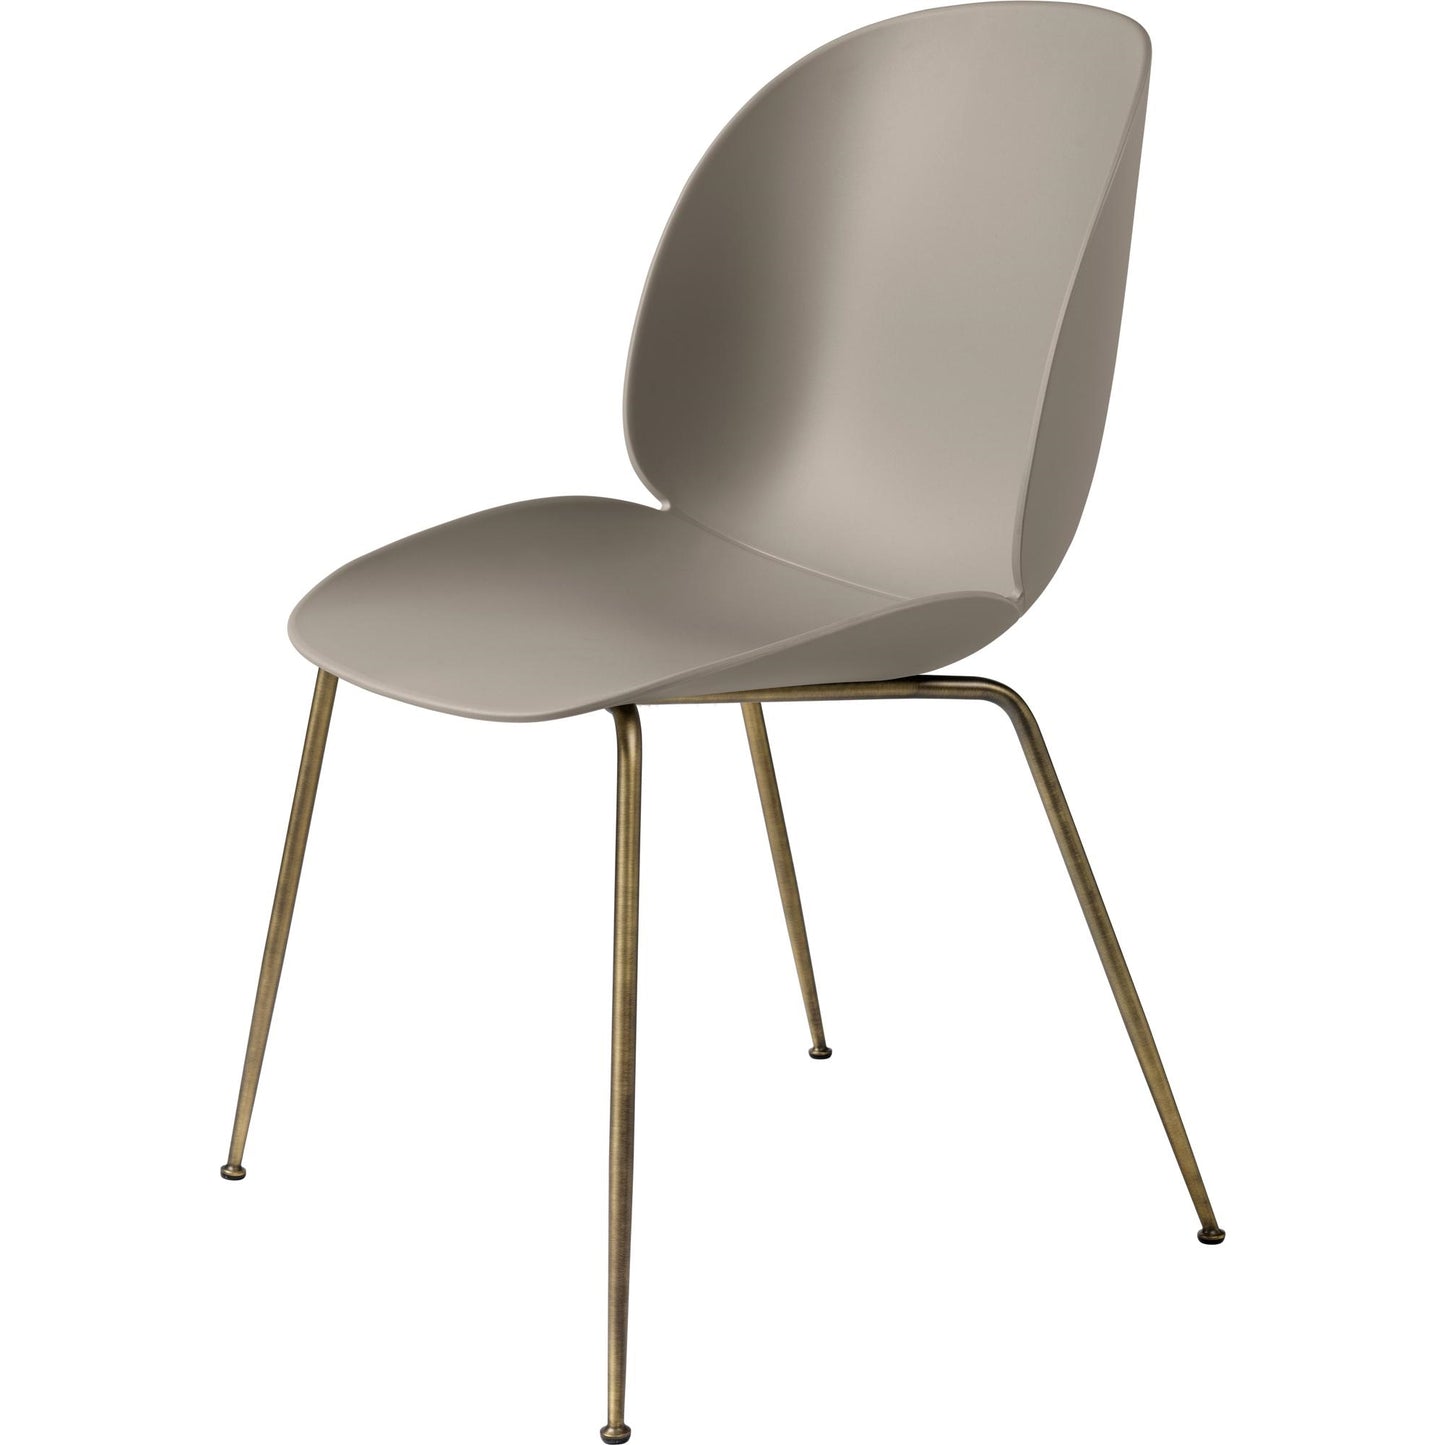 Beetle Dining Chair Conic Base Antique Brass by GUBI #Antique Brass/ New Beige